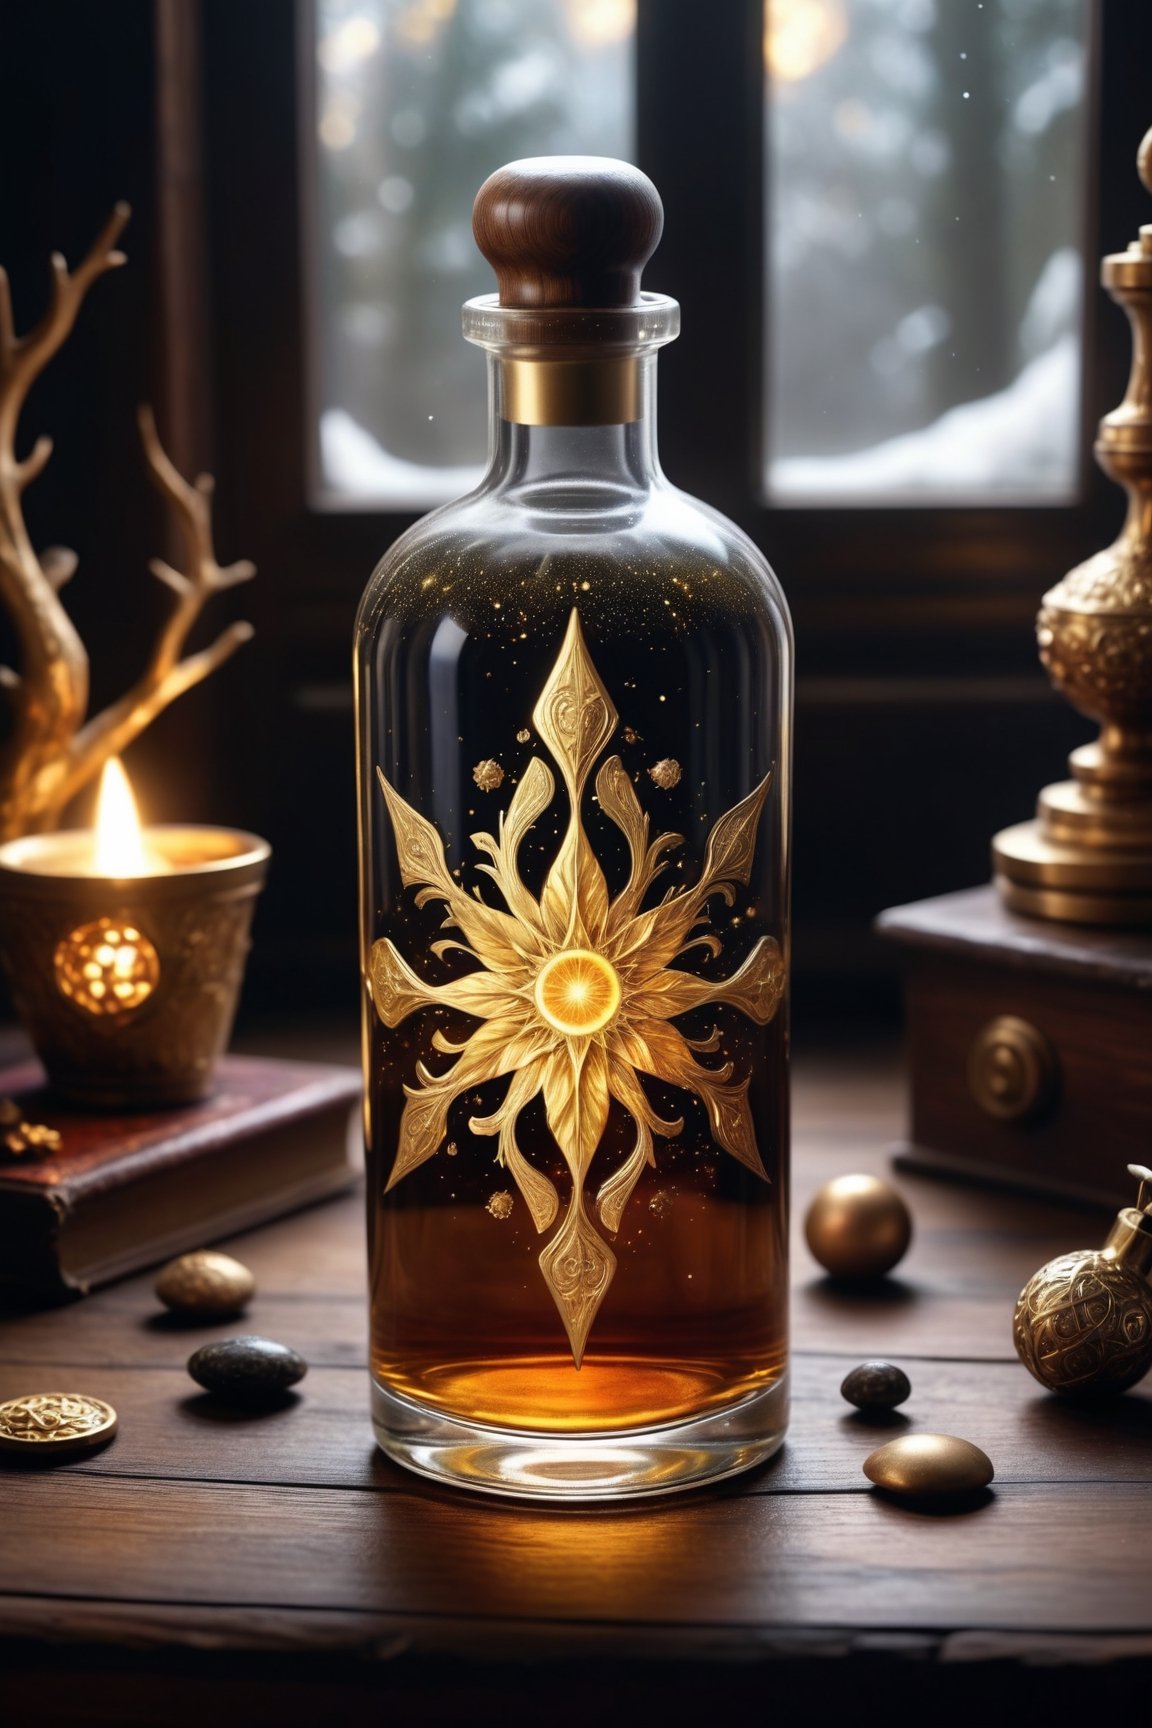 crystal [bottle|volumetric potion flask] of liquid gold brandy healing potion, a glowing radiant cosmic plasma aurora galaxy swirling within it, sitting on an ancient dark hardwood desk with golden arcane symbols engraved along the edges, christmas theme, warm comfortable winter atmosphere